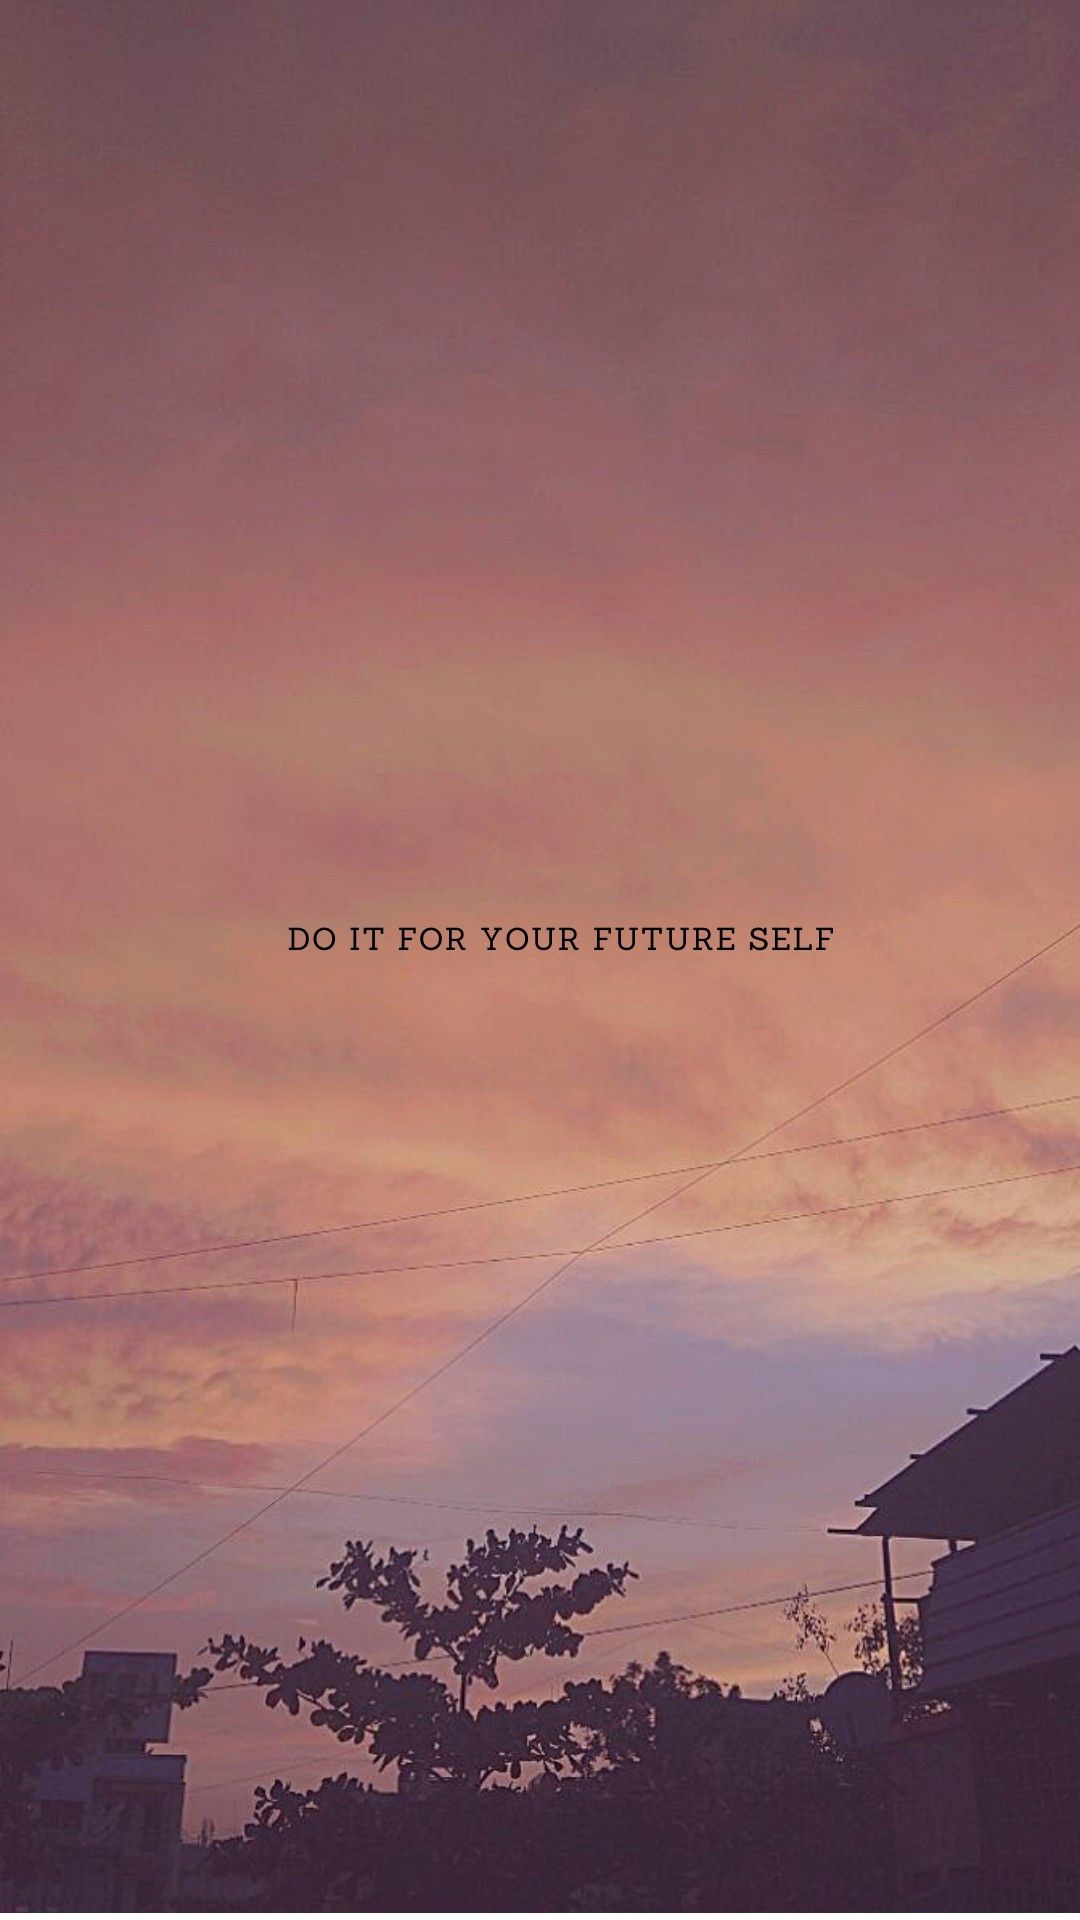 Do it for your Future Self Motivational Quotes Aesthetic iPhone Wallpaper. iPhone wallpaper vintage quotes, Pretty phone wallpaper, Aesthetic lockscreens